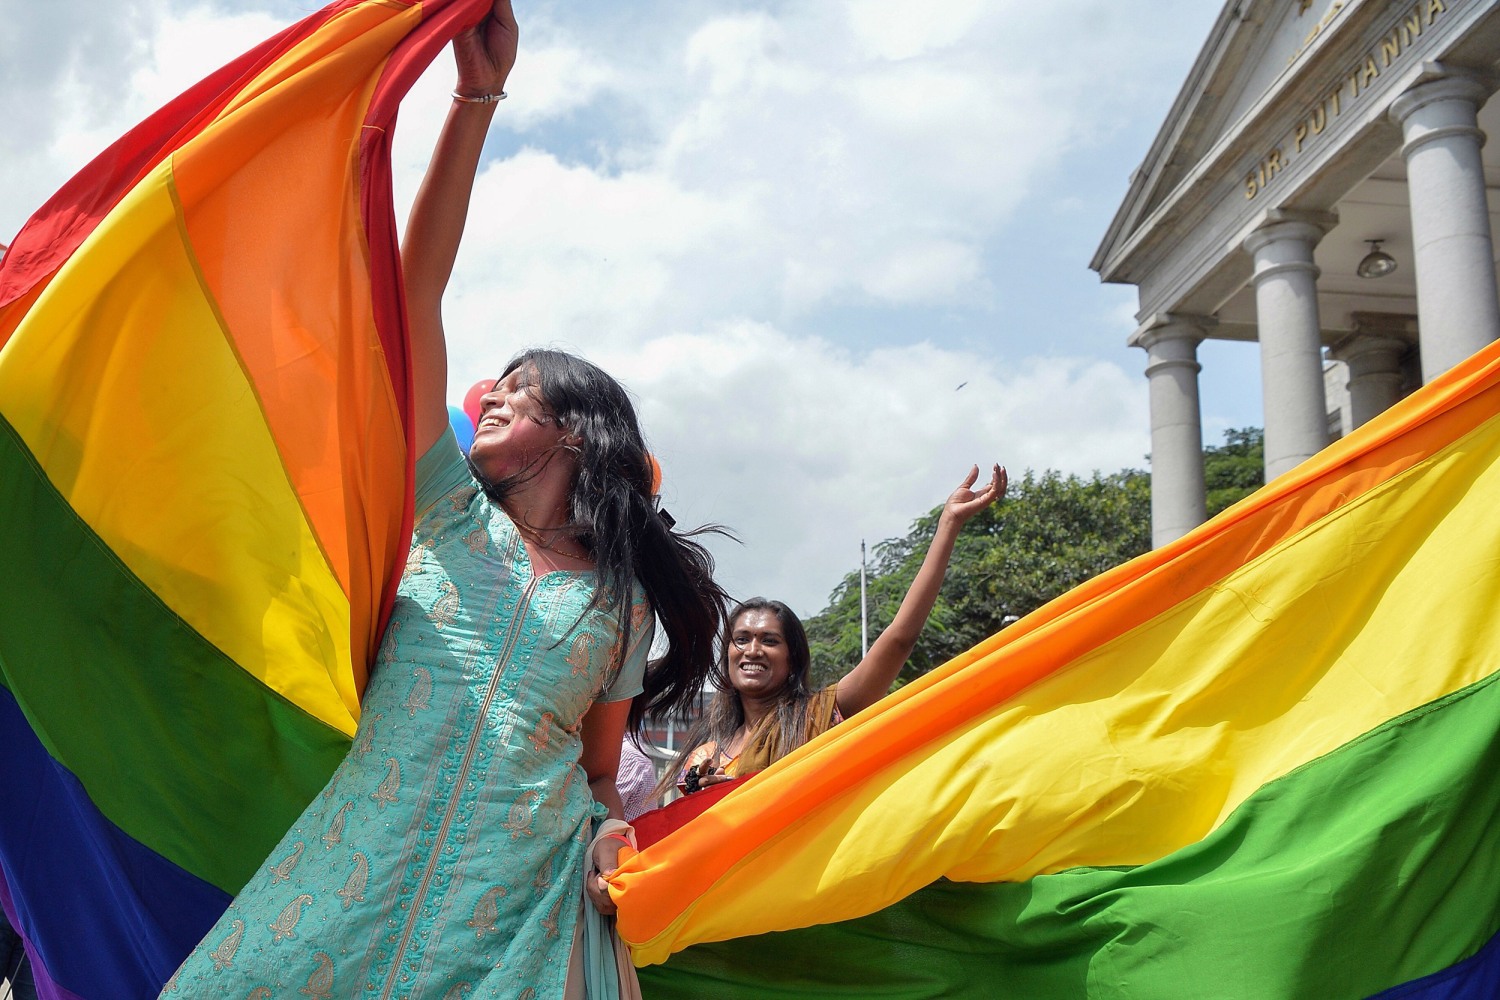 After homosexuality decriminalization, Indian court finds in favor of lesbian couple